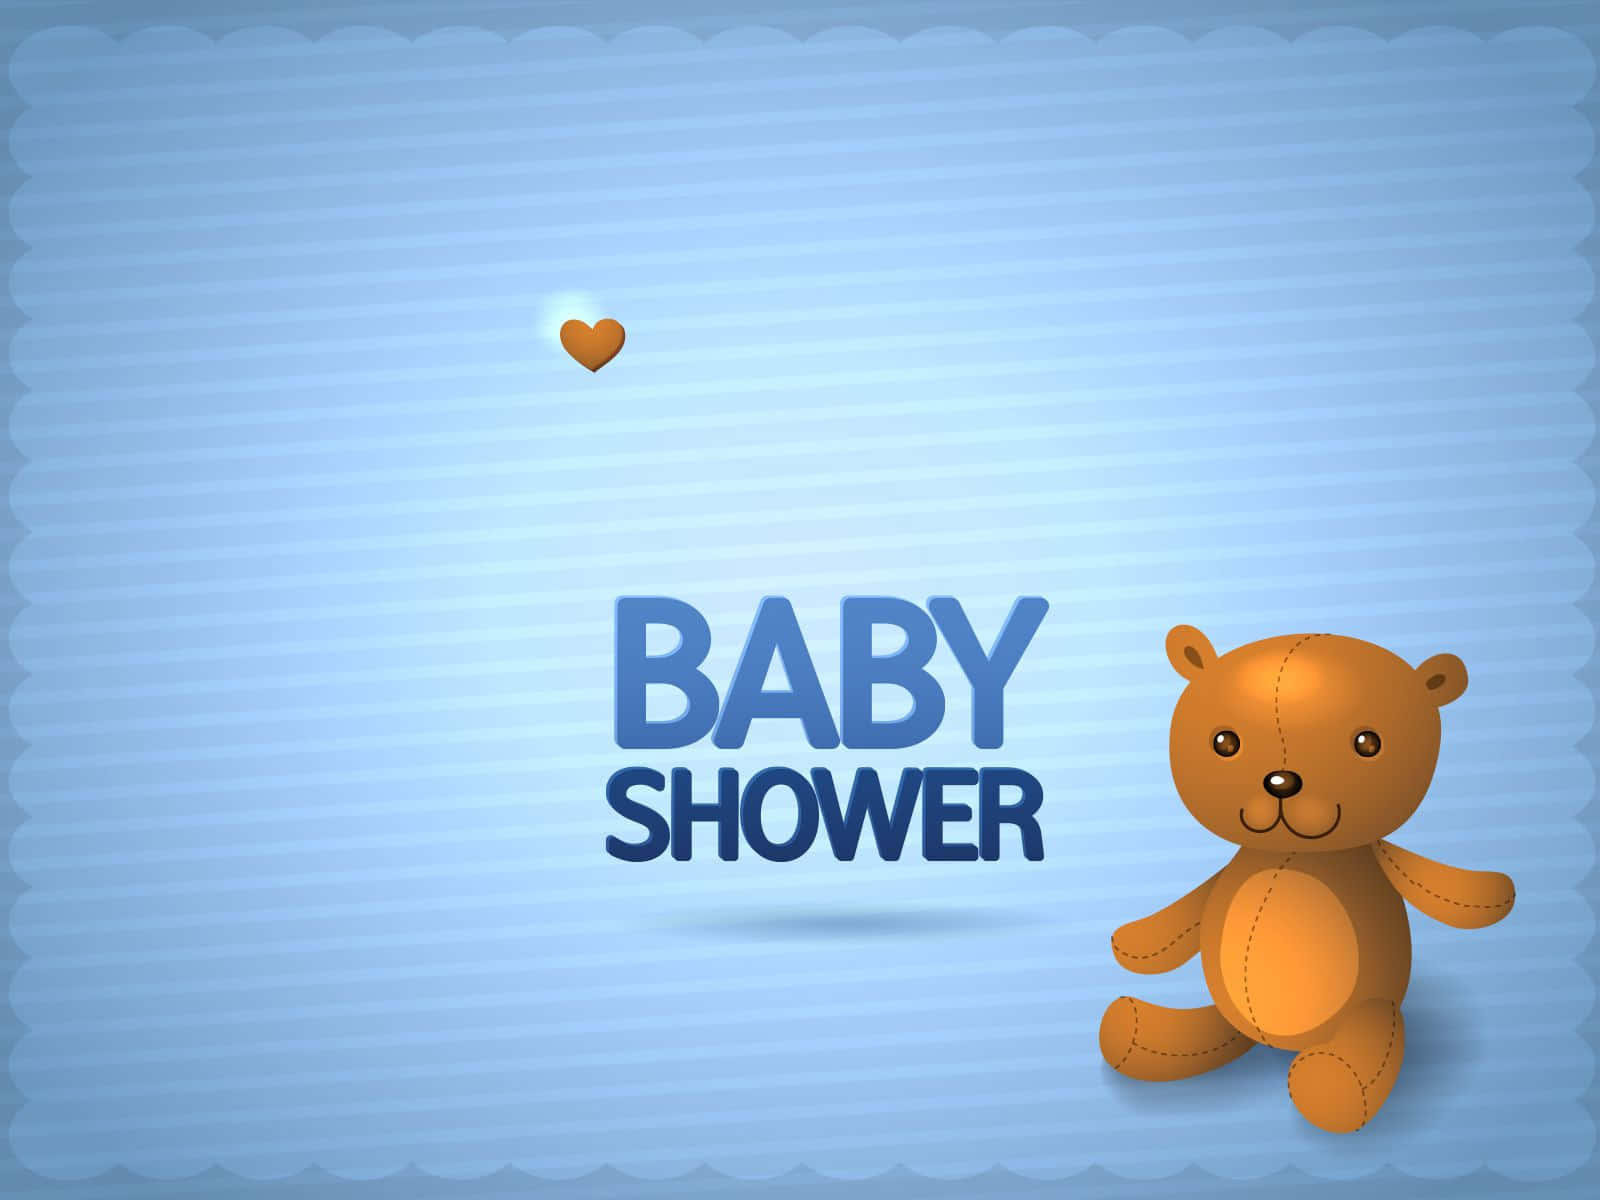 Celebrate a New Gift of Life with a Special Baby Shower